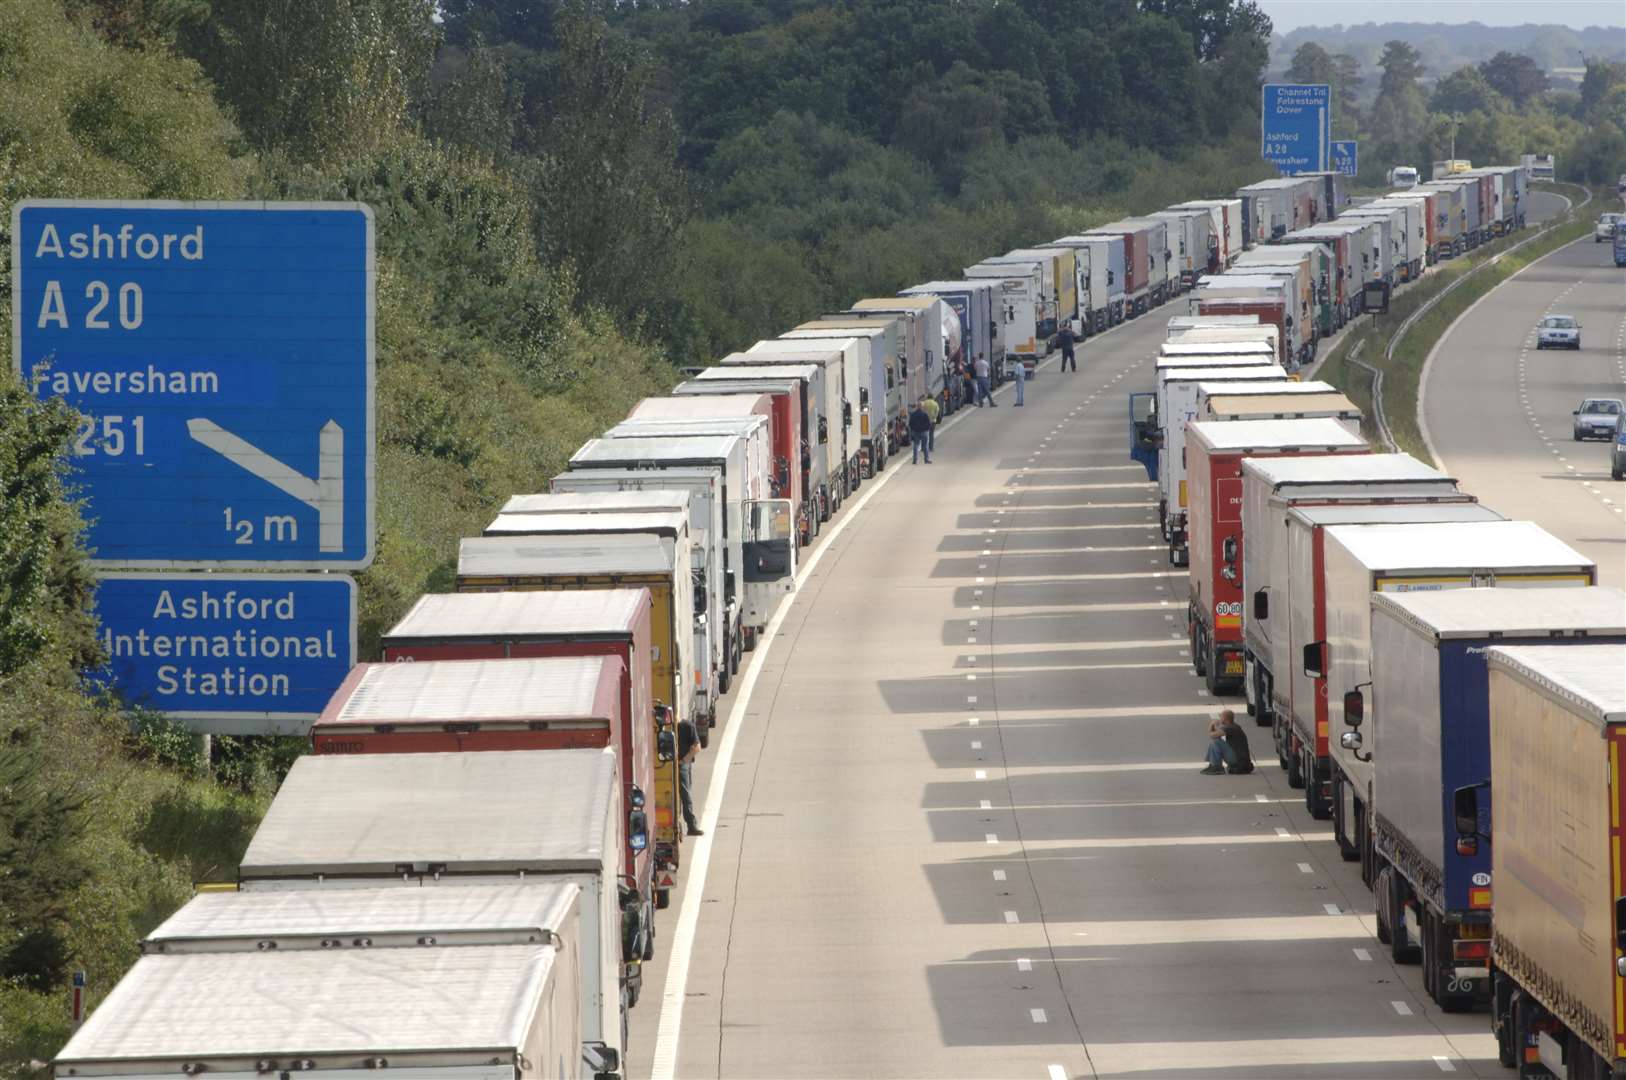 Operation stack in place due in 2008. Stock picture